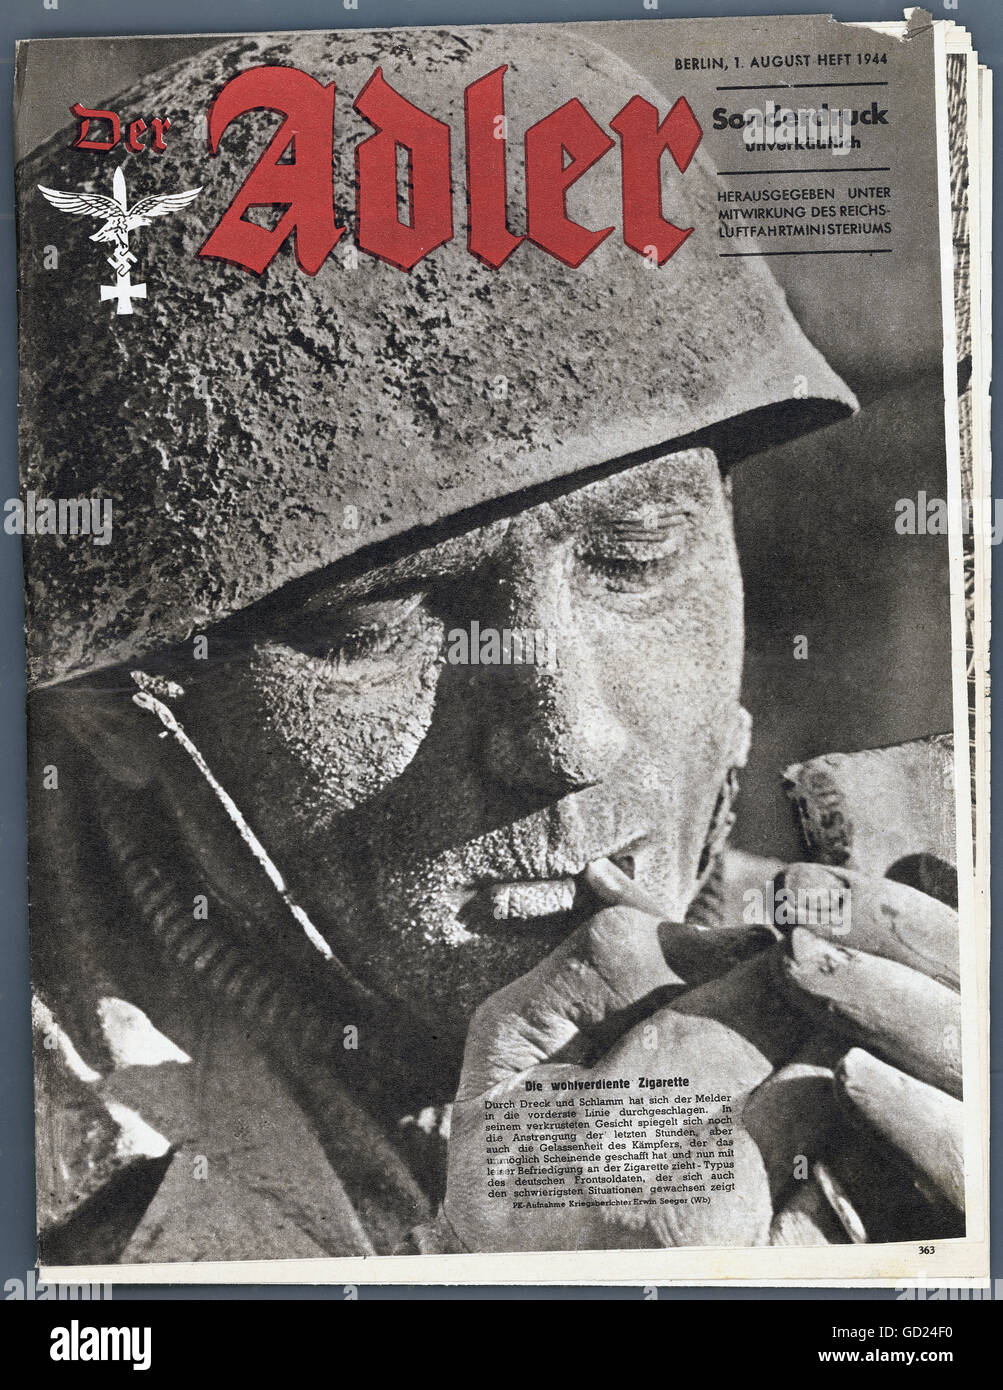 events, Second World War / WWII, propaganda, title page of the magazine 'Der Adler', special issue, 1.8.1944, muddy German paratrooper lighting a cigarette, Additional-Rights-Clearences-Not Available Stock Photo